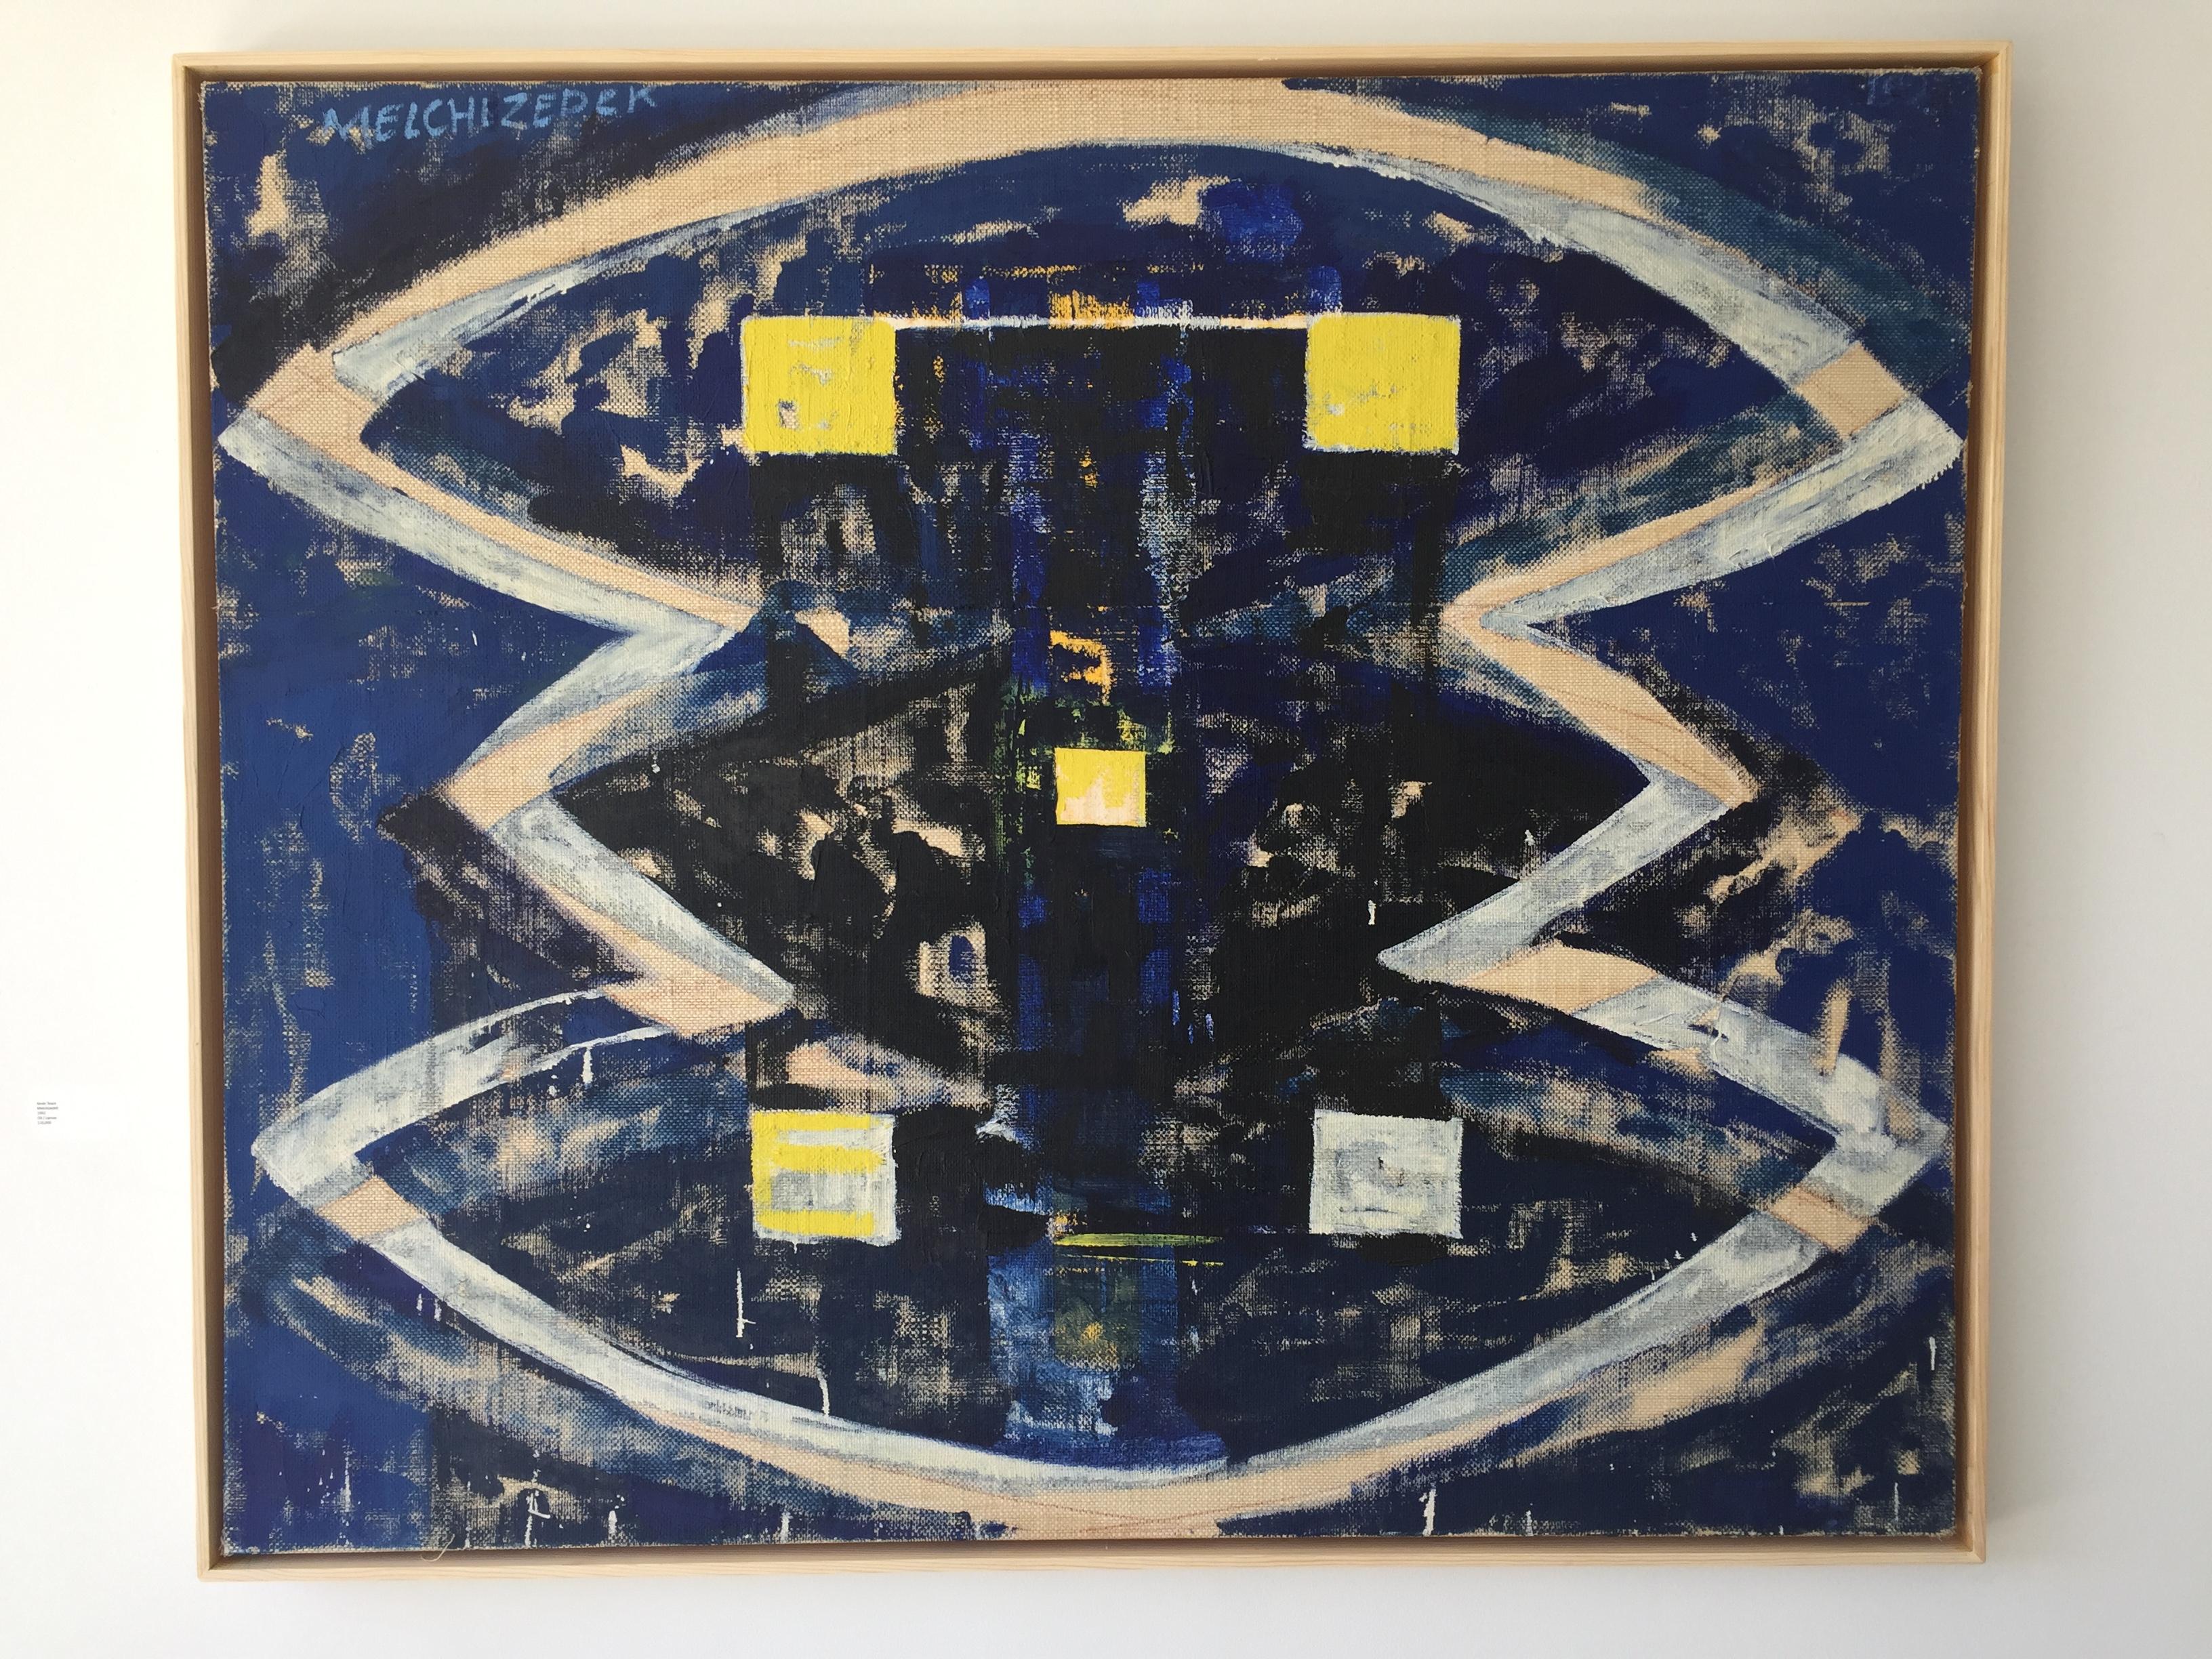 Melchizedek (ABSTRACT BLUE/YELLOW PALETTE, OIL ON CANVAS) - Contemporary Mixed Media Art by Kevin Teare